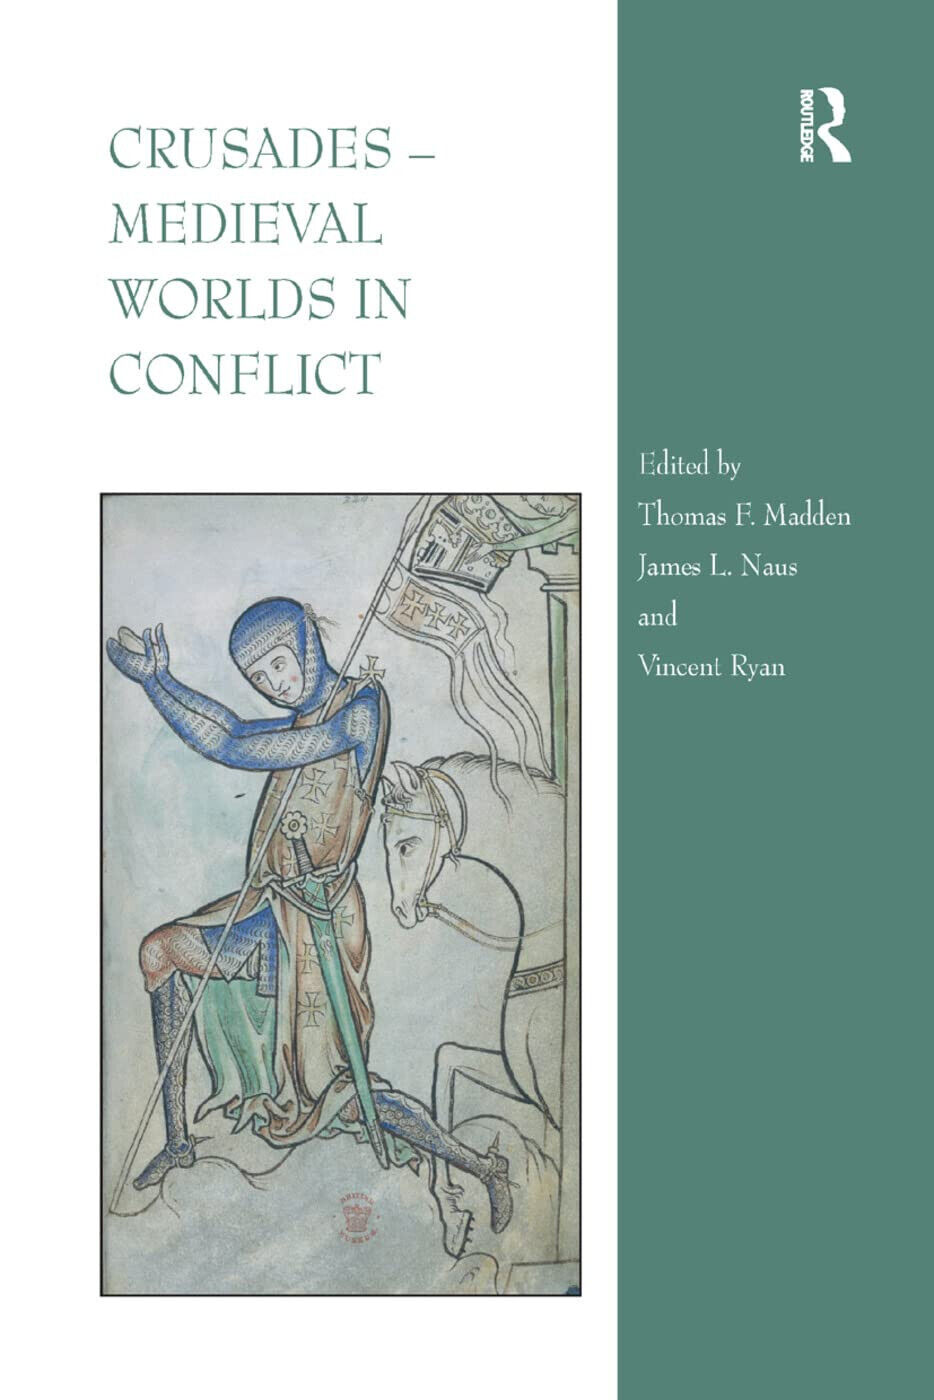 Crusades - Medieval Worlds in Conflict - Thomas F. Madden - Routledge, 2019